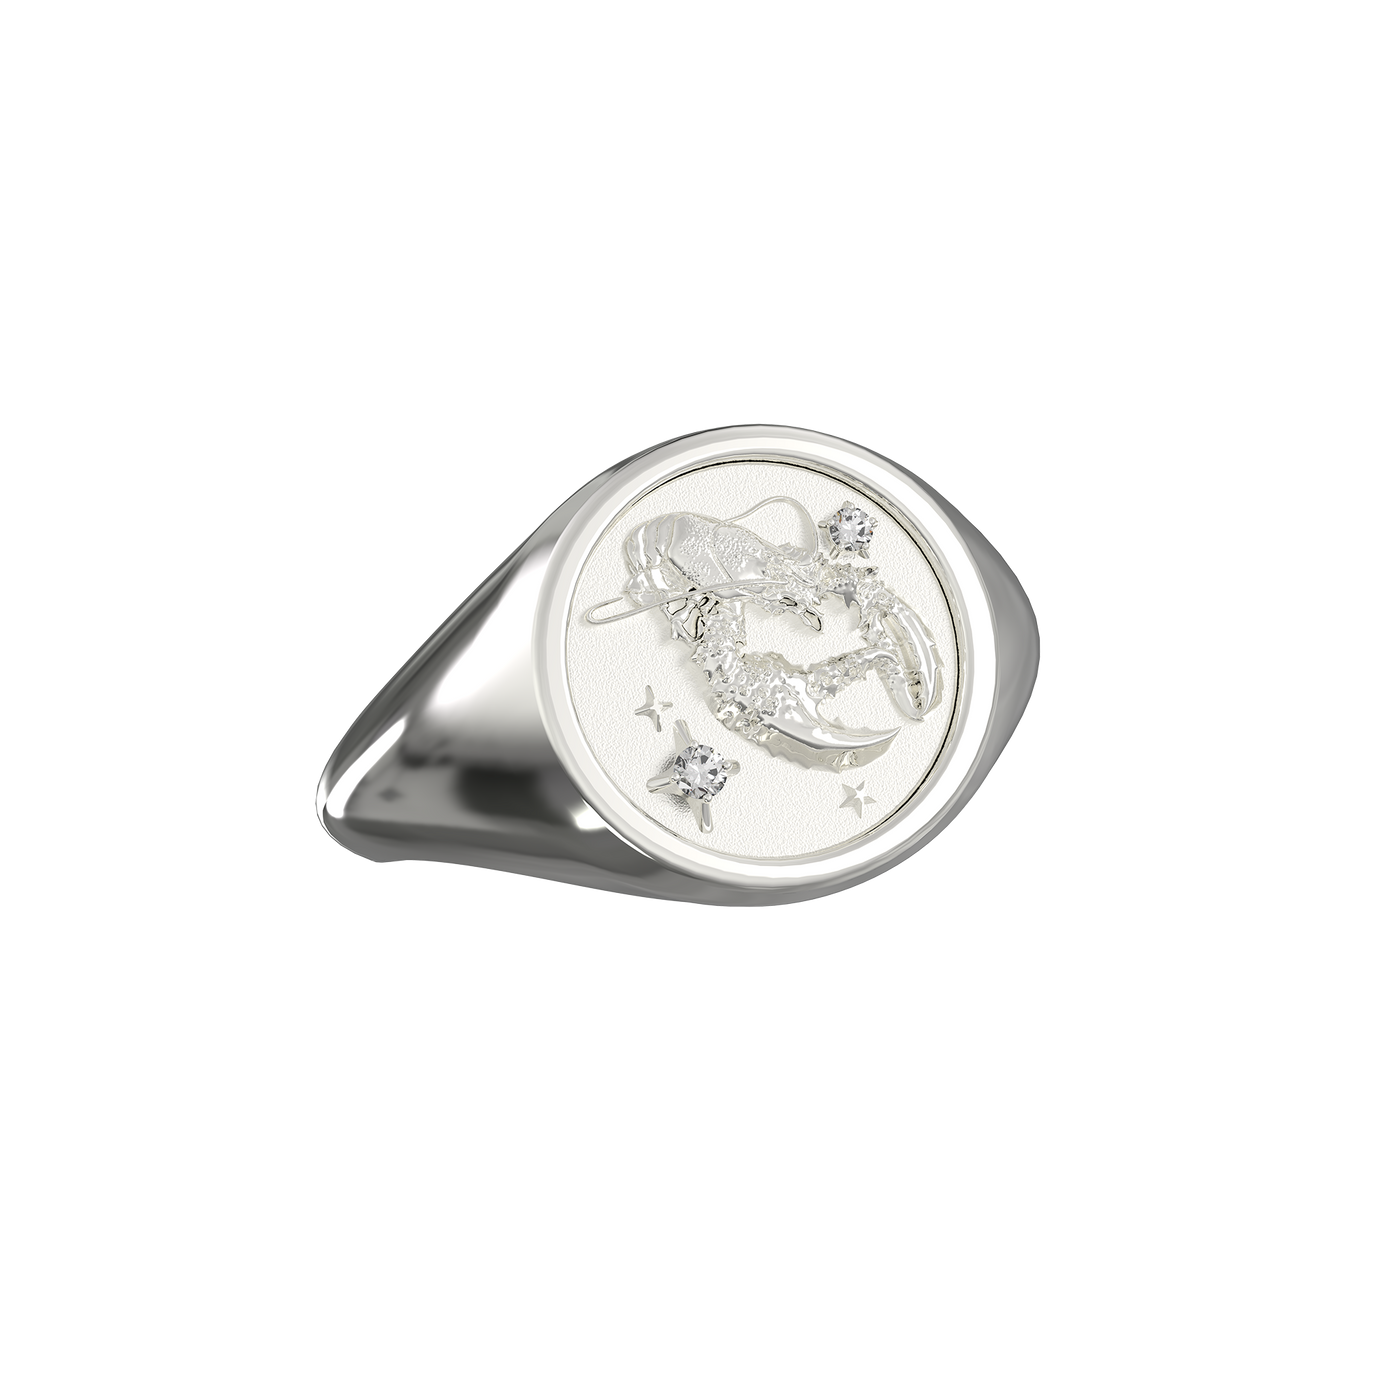 Cancer Small Signet Ring